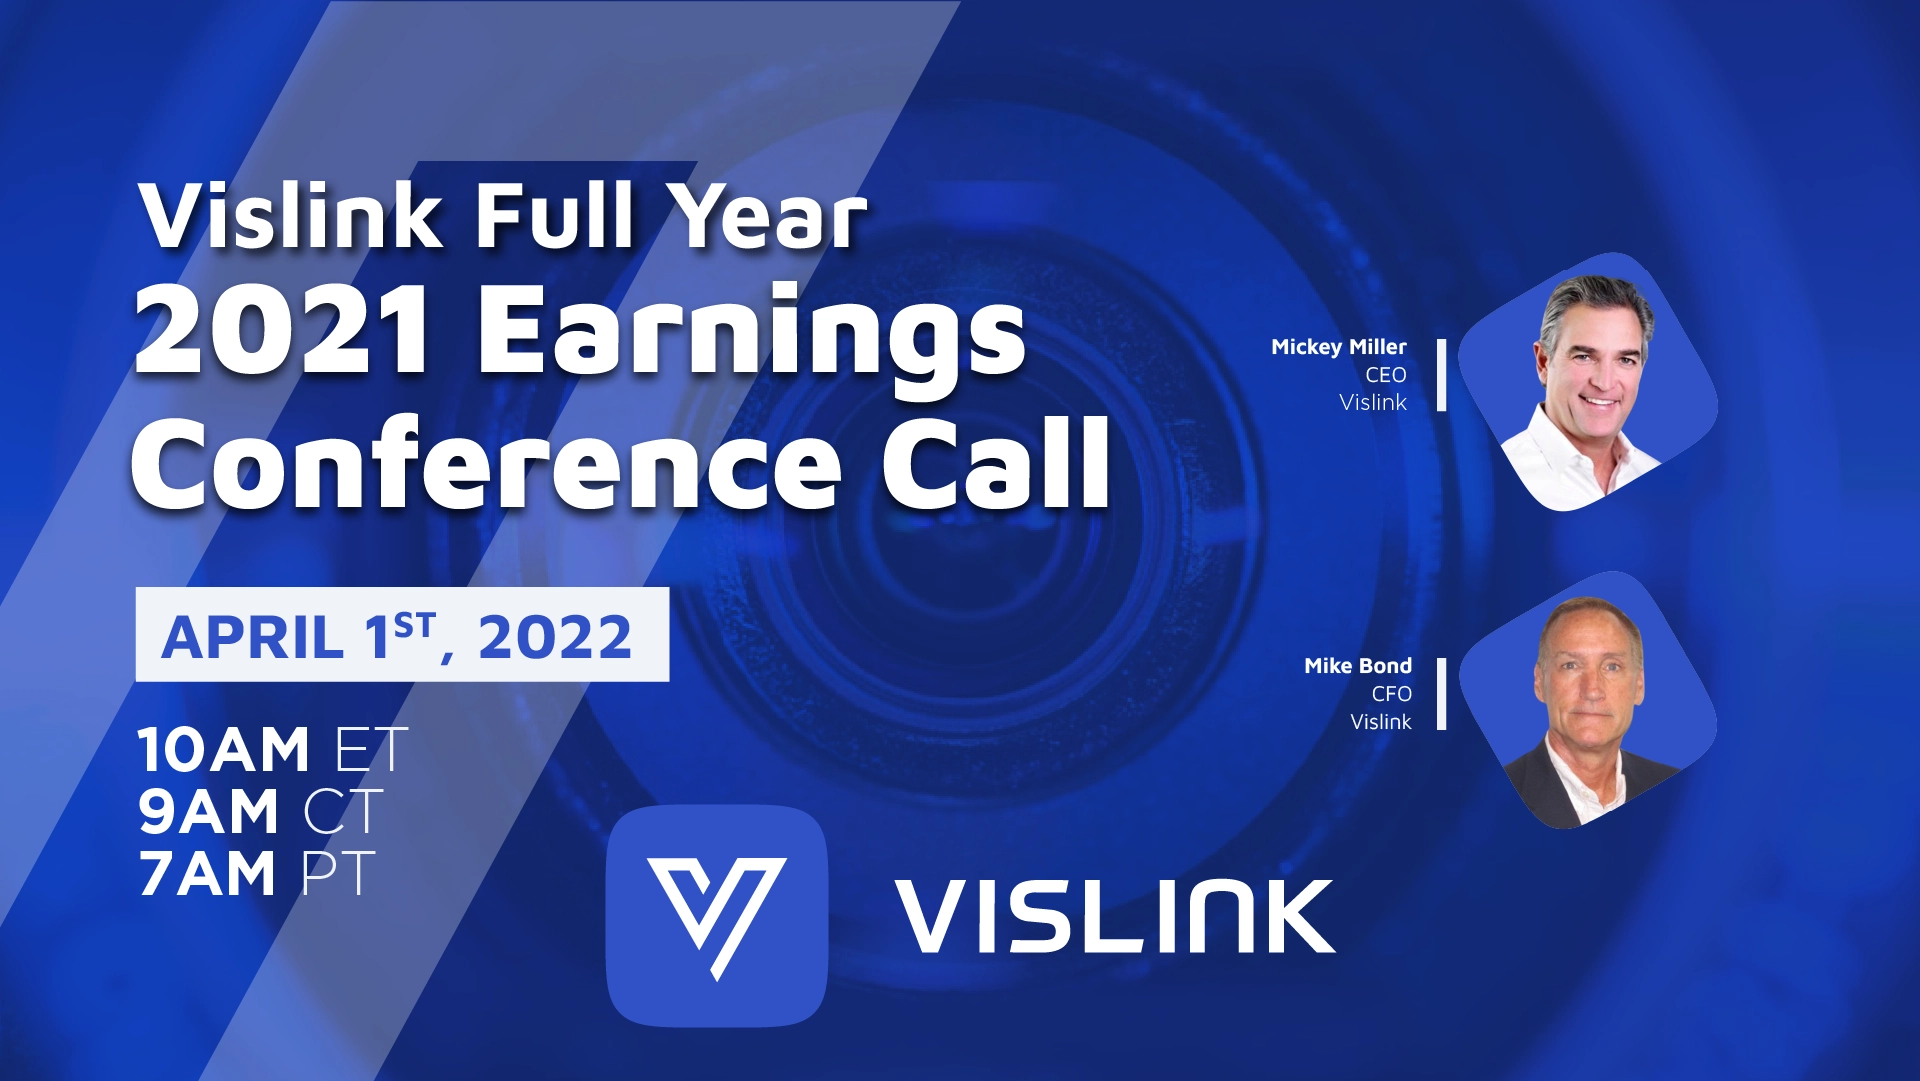 Vislink Full Year 2021 Earnings Conference Call